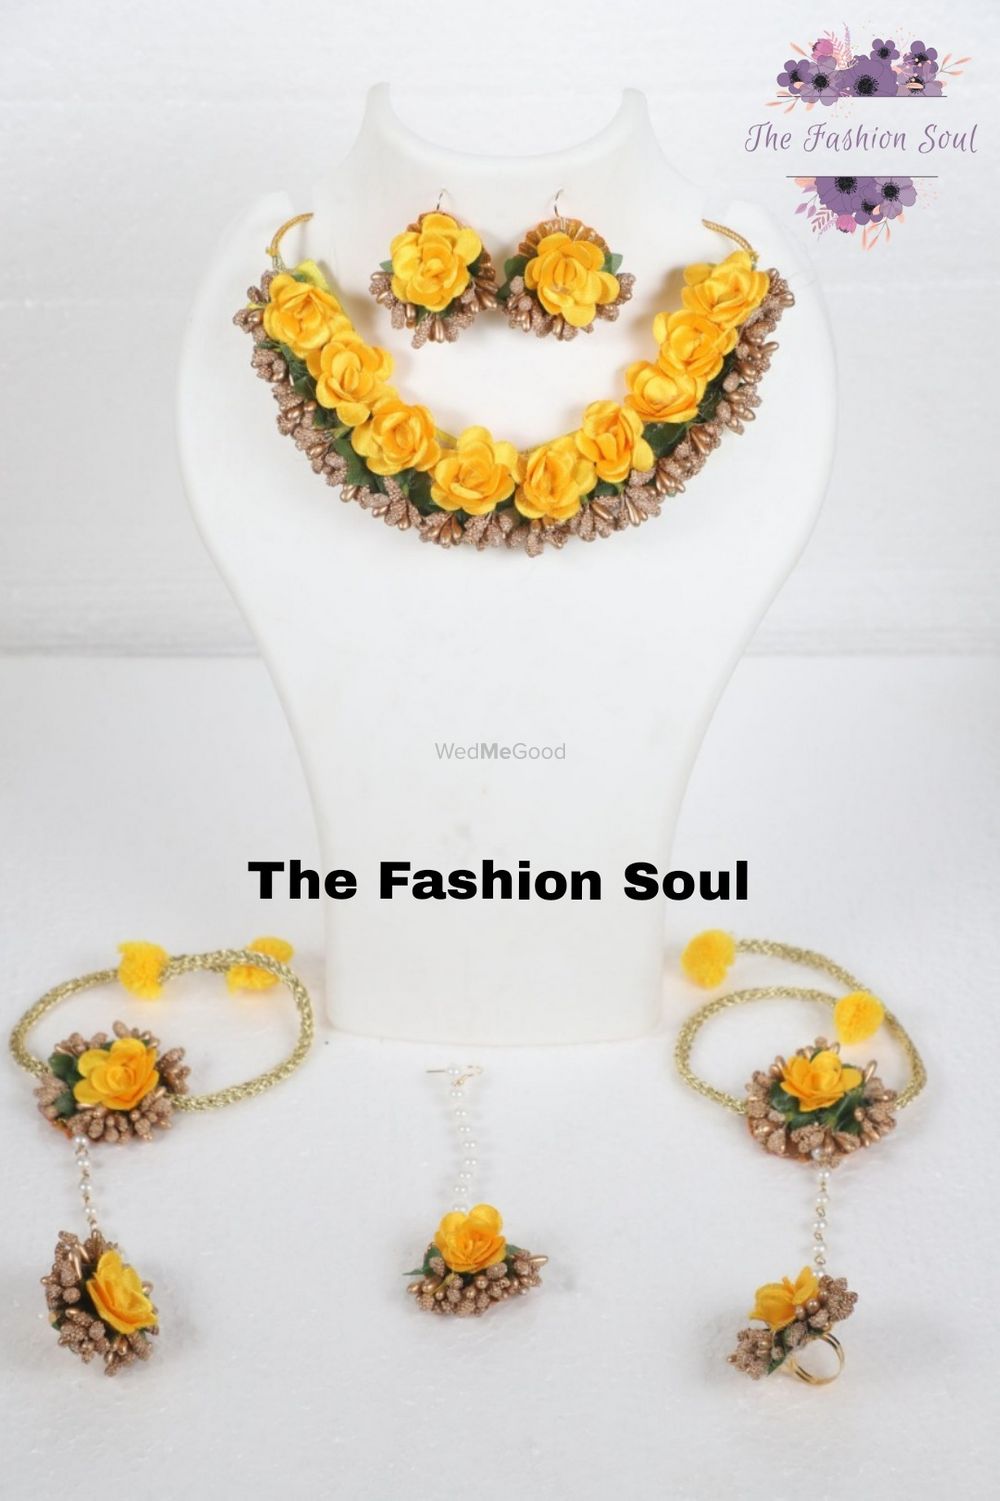 Photo From floral jewellery - By The Fashion Soul